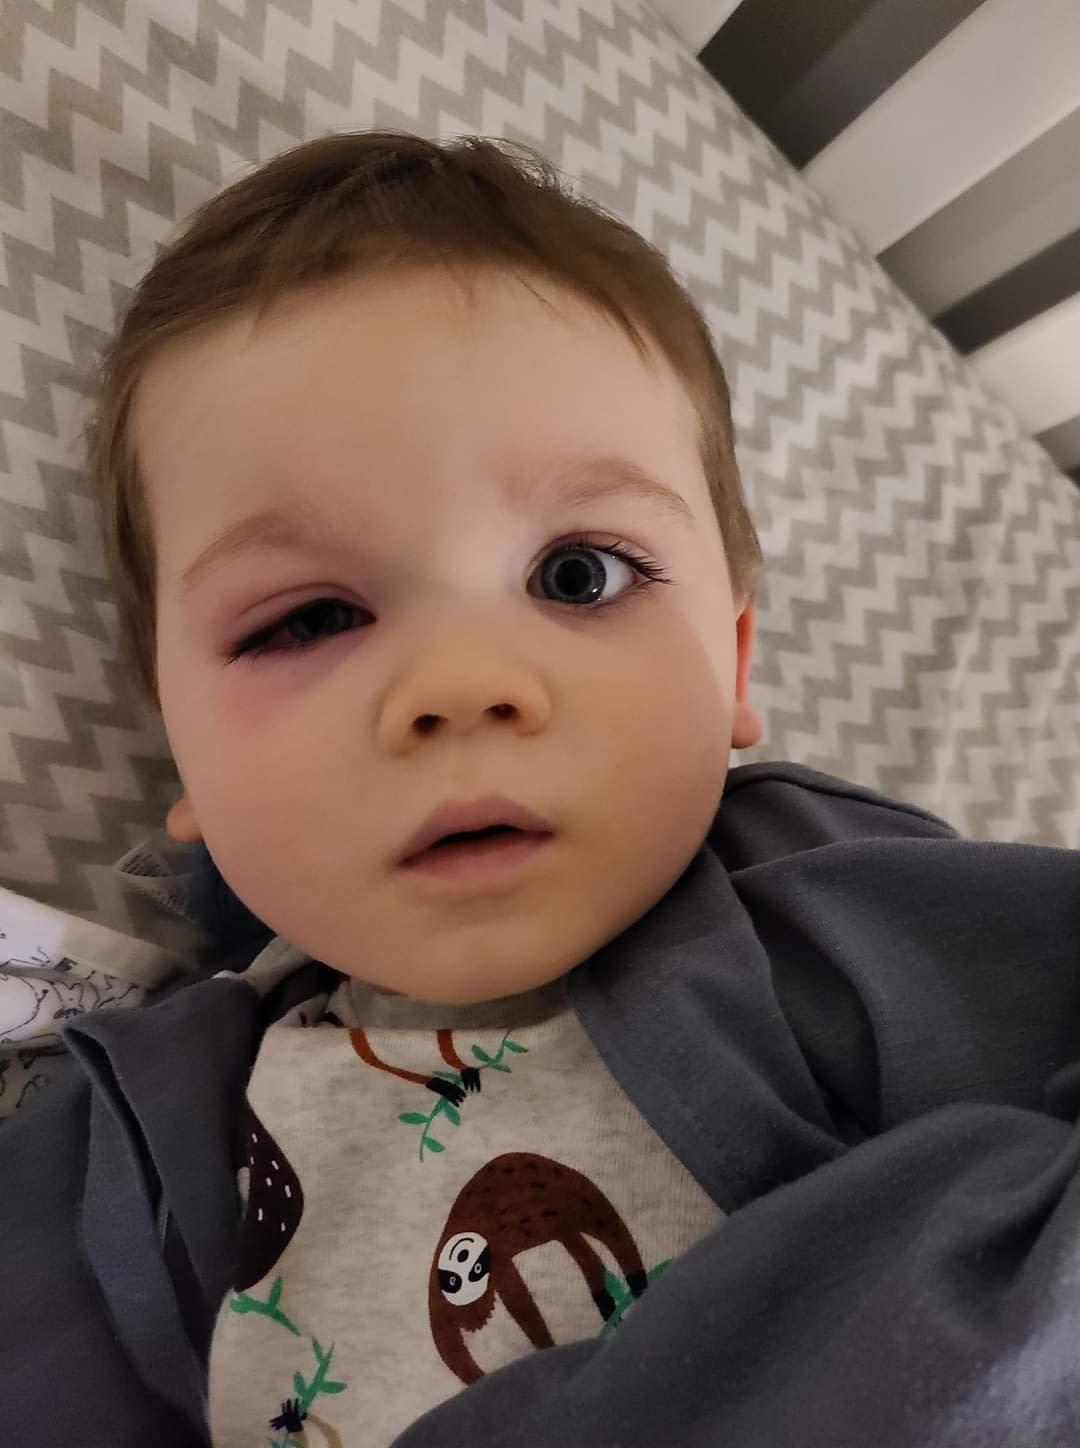 The writer's son, with the eye infection that sent him to the hospital. (Photo courtesy Eden Strong)